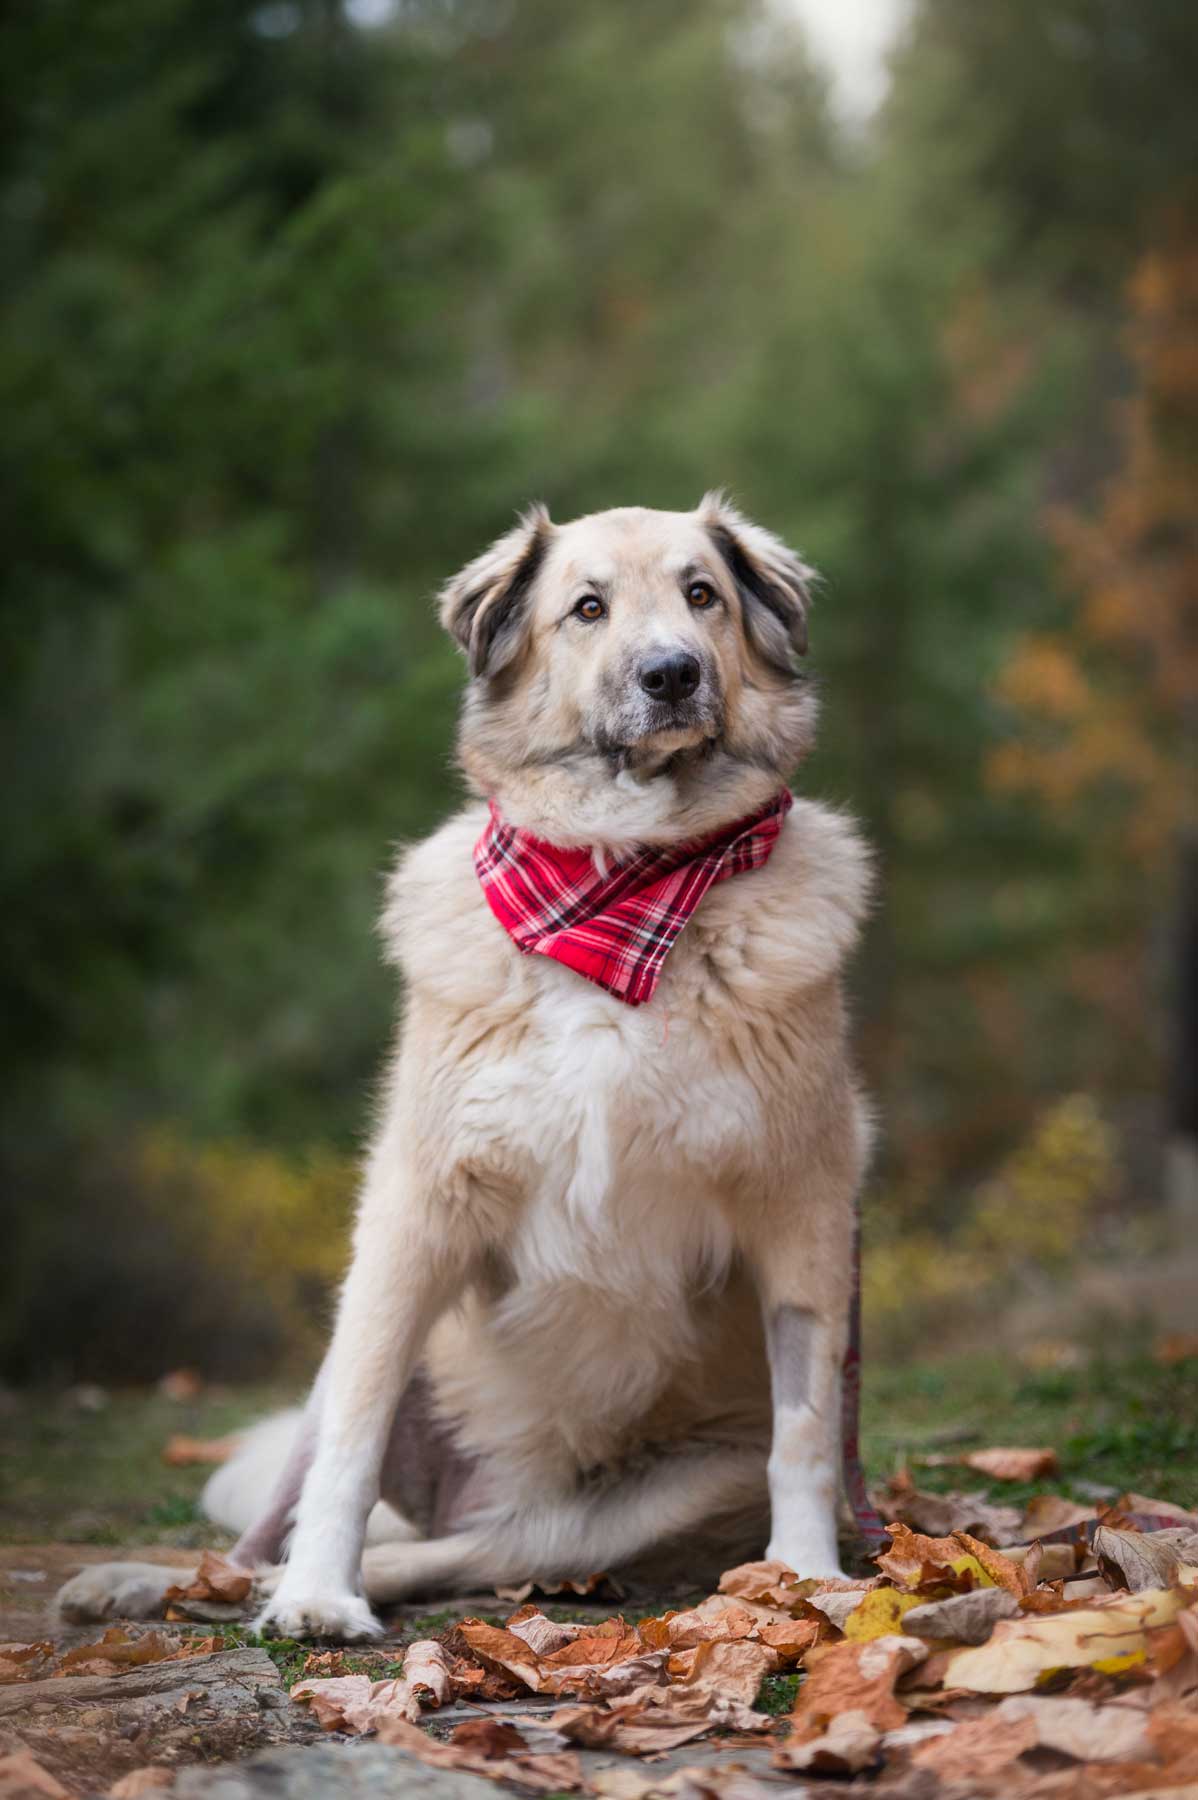 A dog wearing a red scarf.